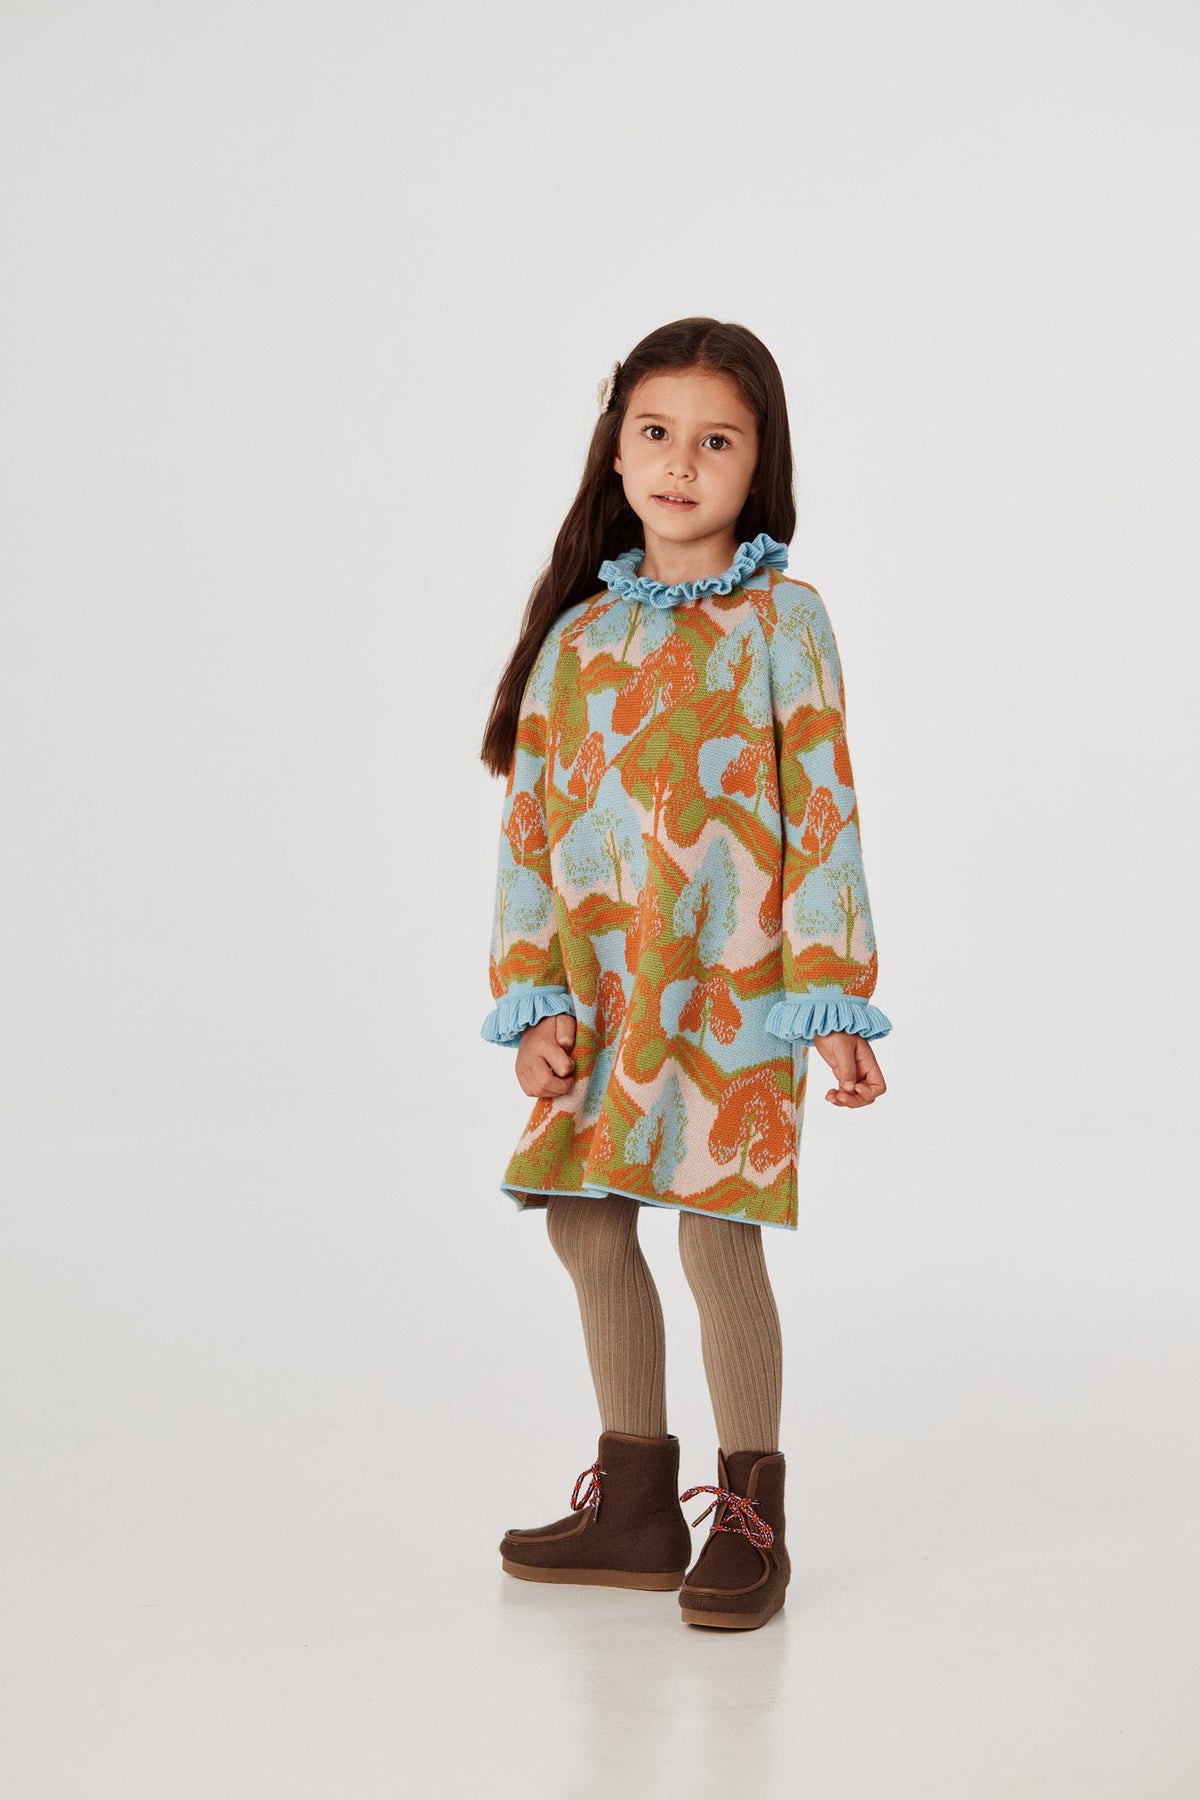 Jacquard Dress - Dune Landscape+Model is 45 inches tall, 35lbs, wearing a size 4-5y